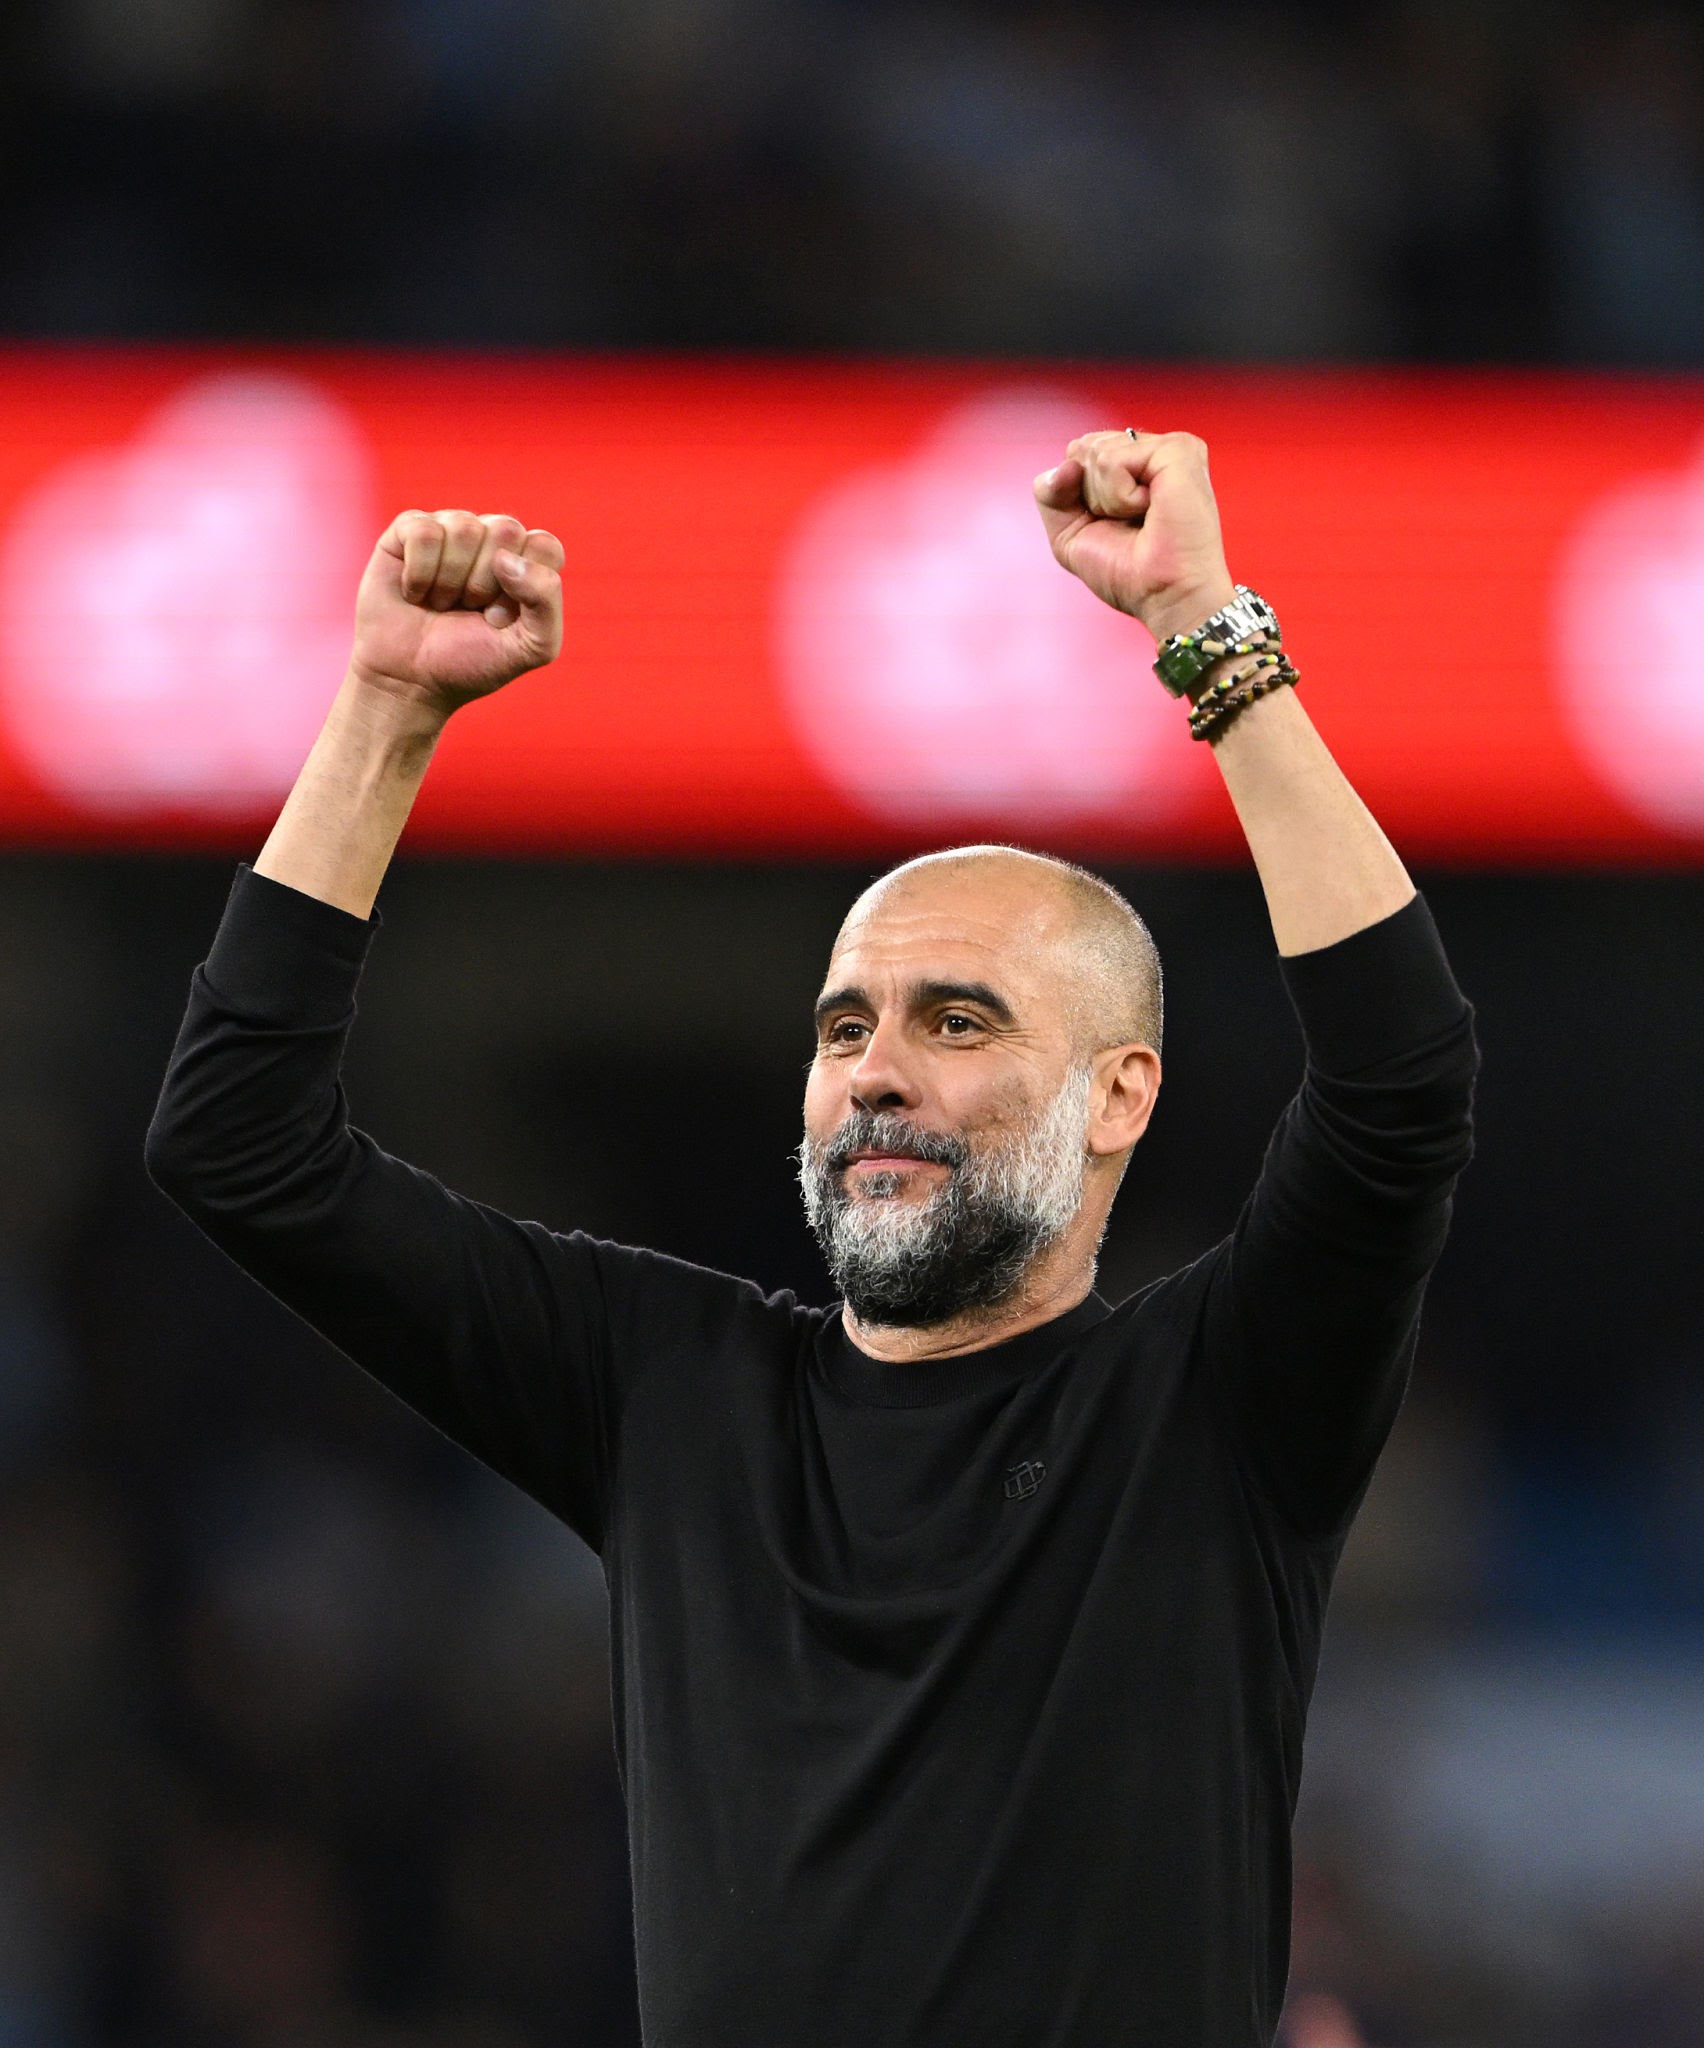 ‘One of the best’ – Guardiola hails Man City player after Man Utd win